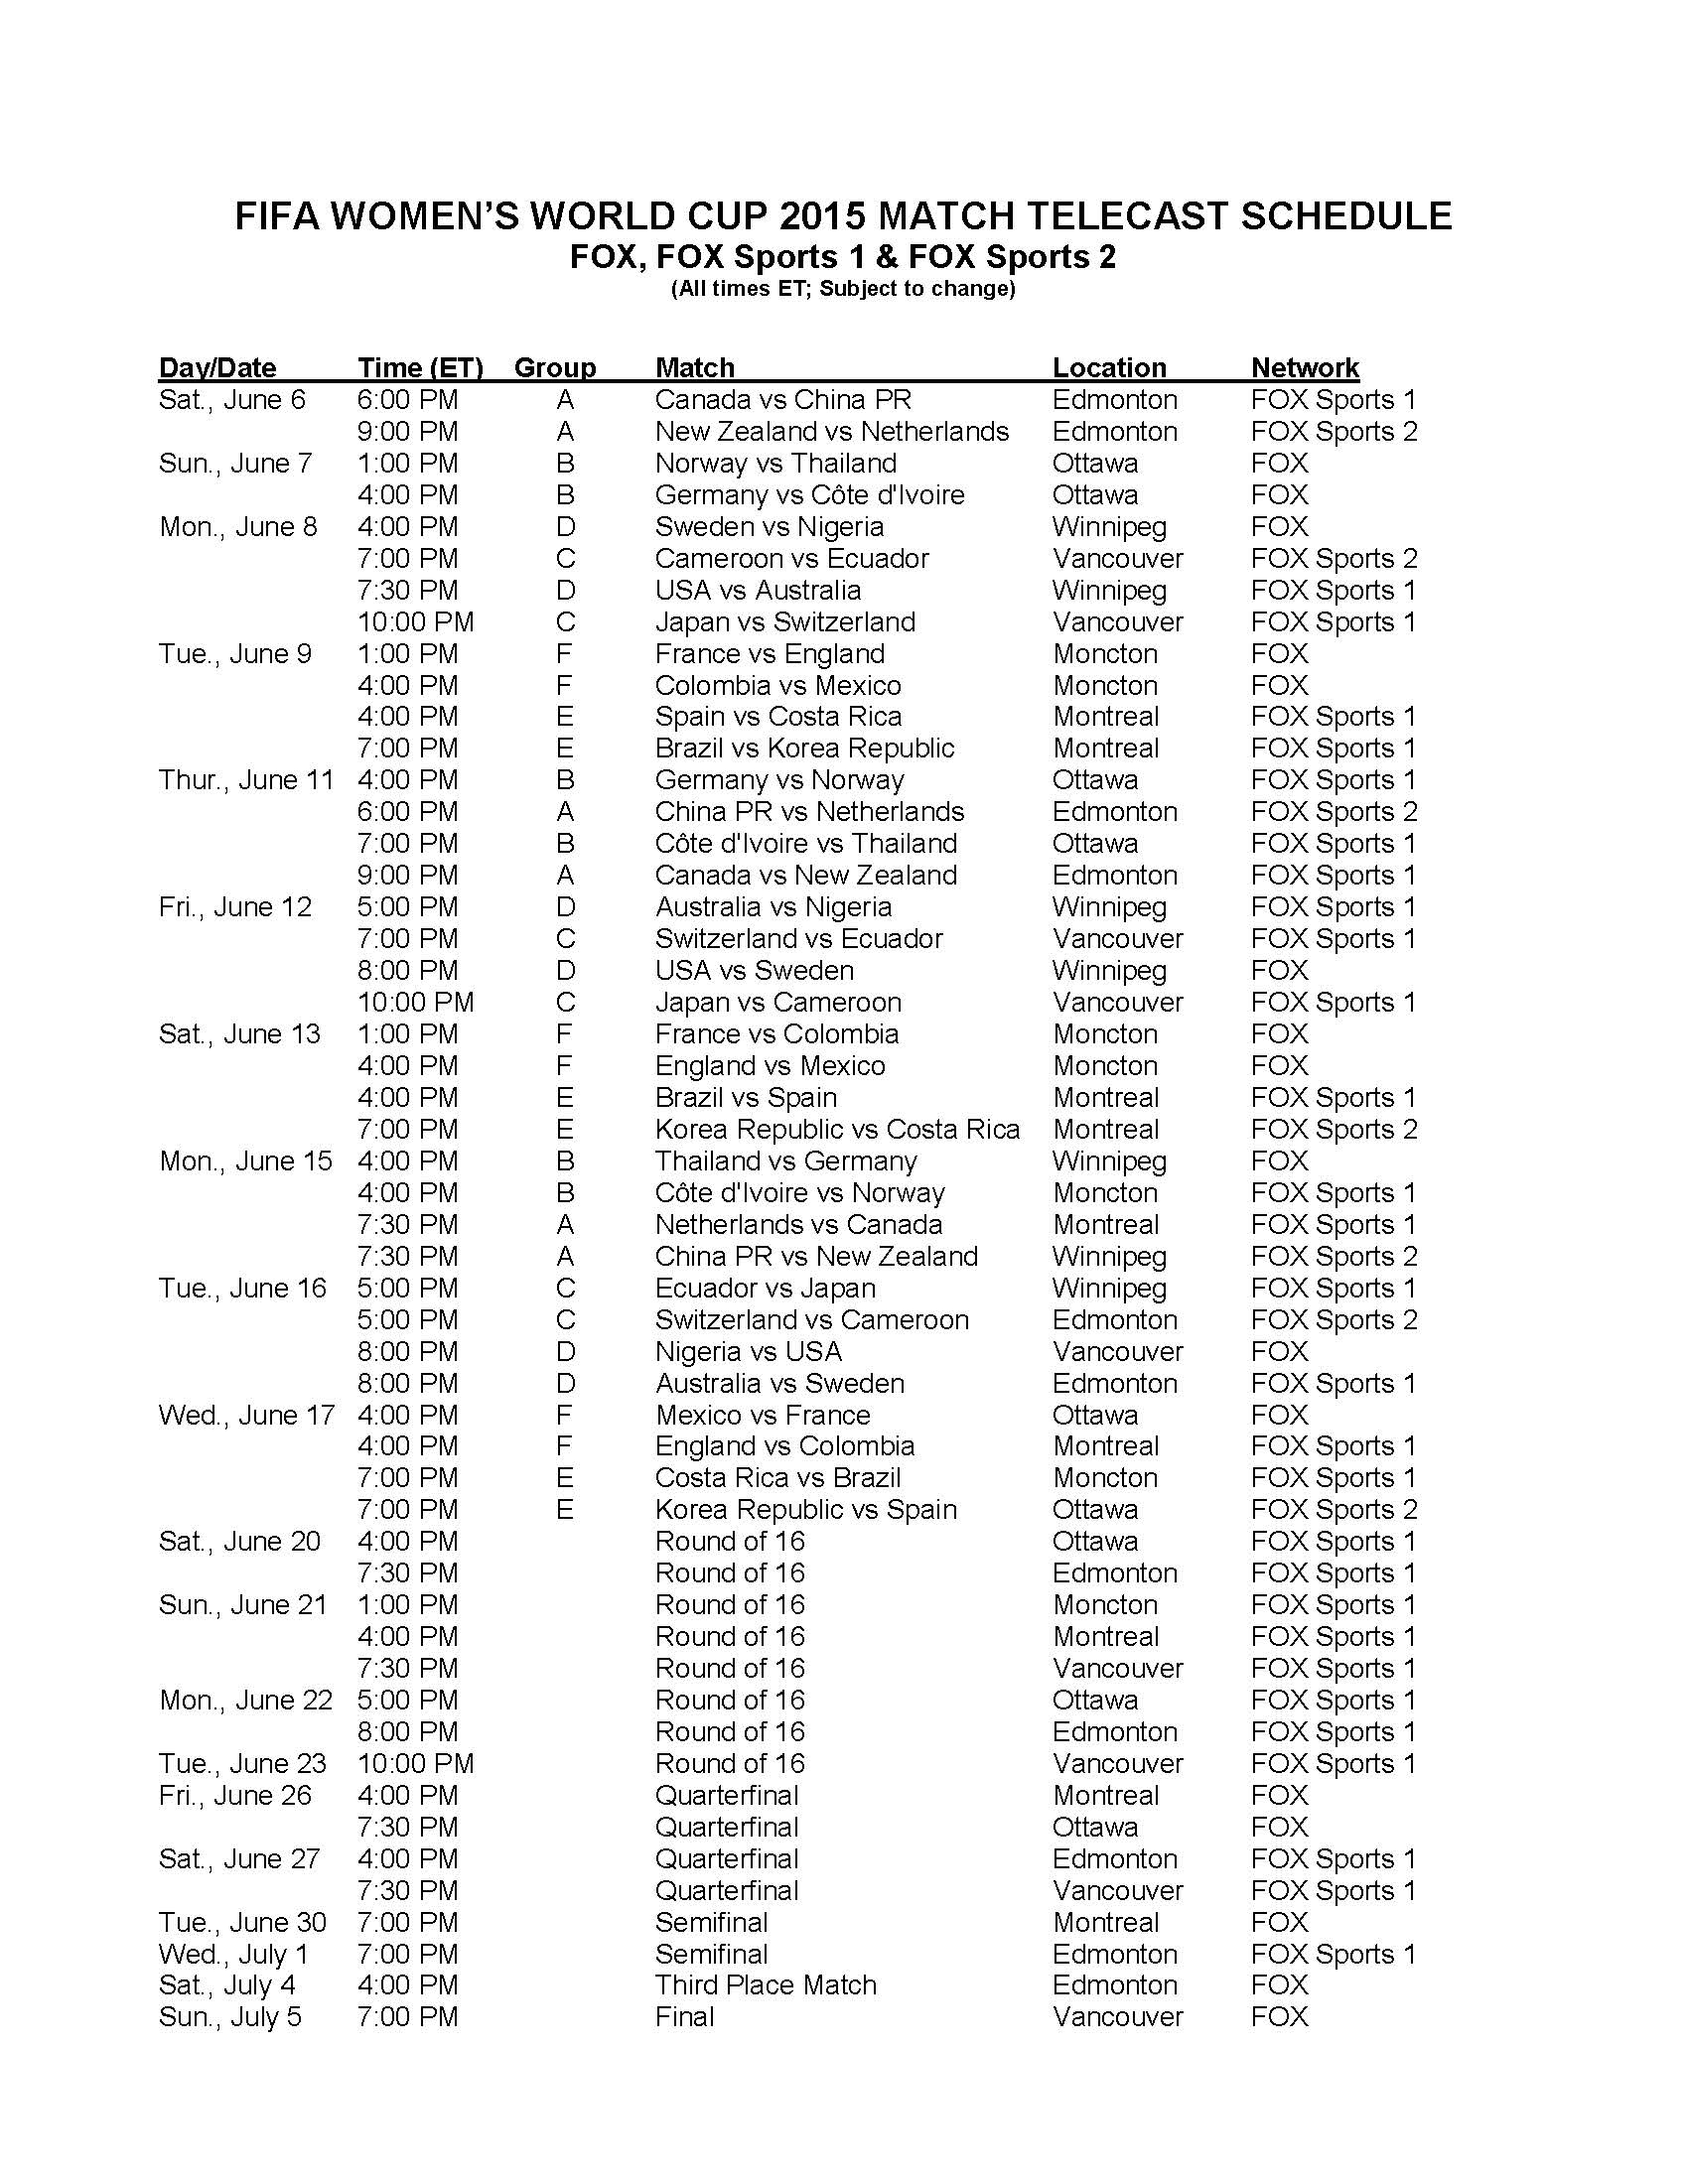 Complete FIFA Women’s World Cup Fox Sports Game Schedule 100 Percent